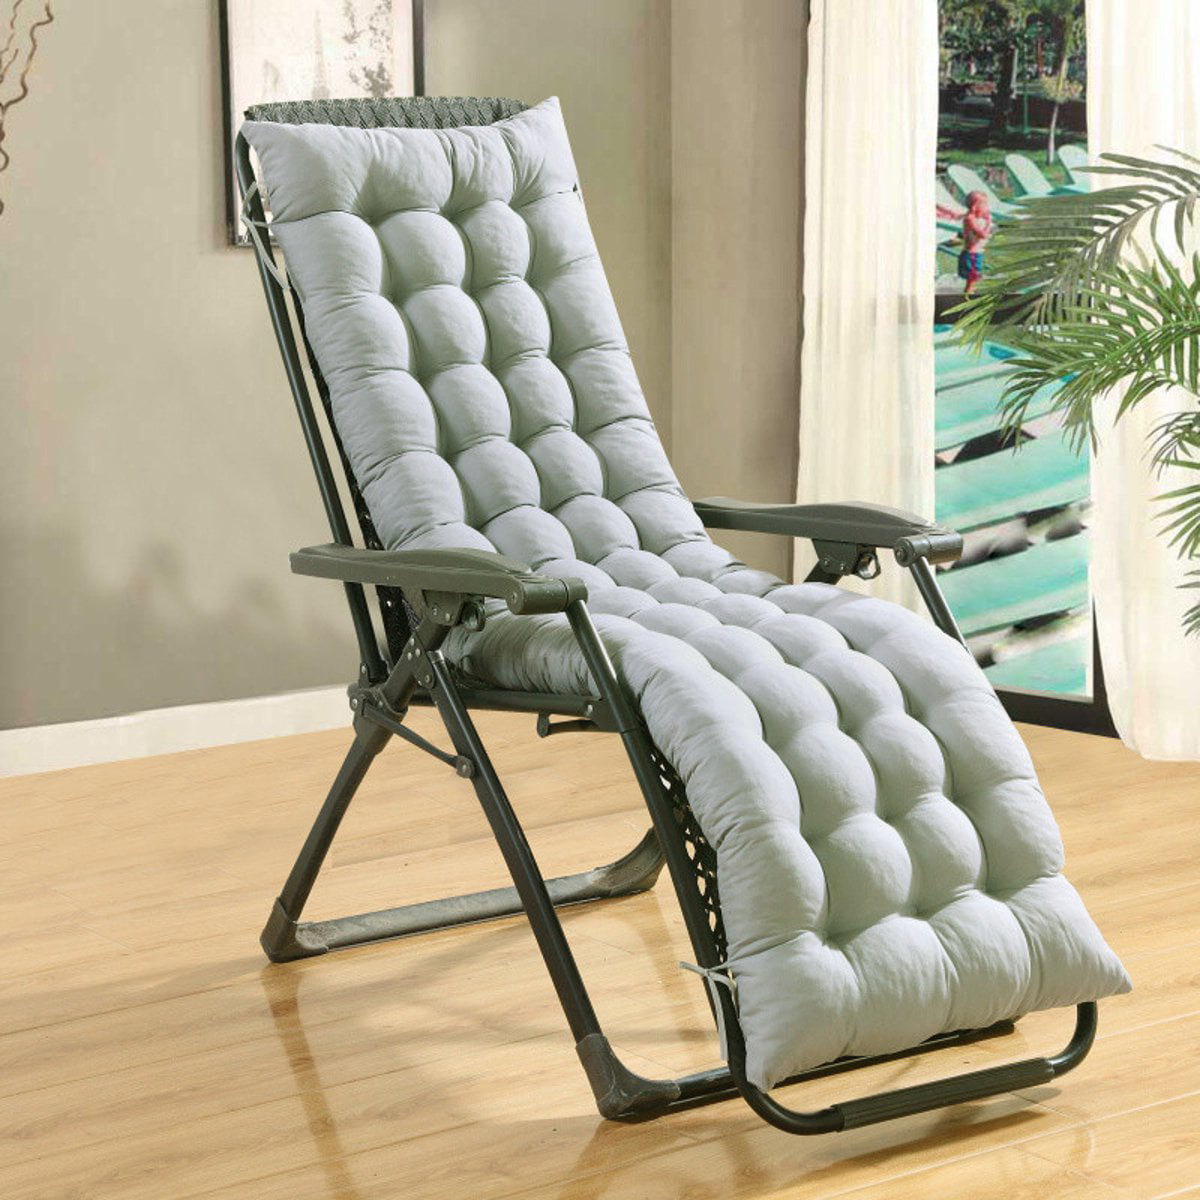 patio chaise lounger cushion, indoor/outdoor chaise lounger cushions